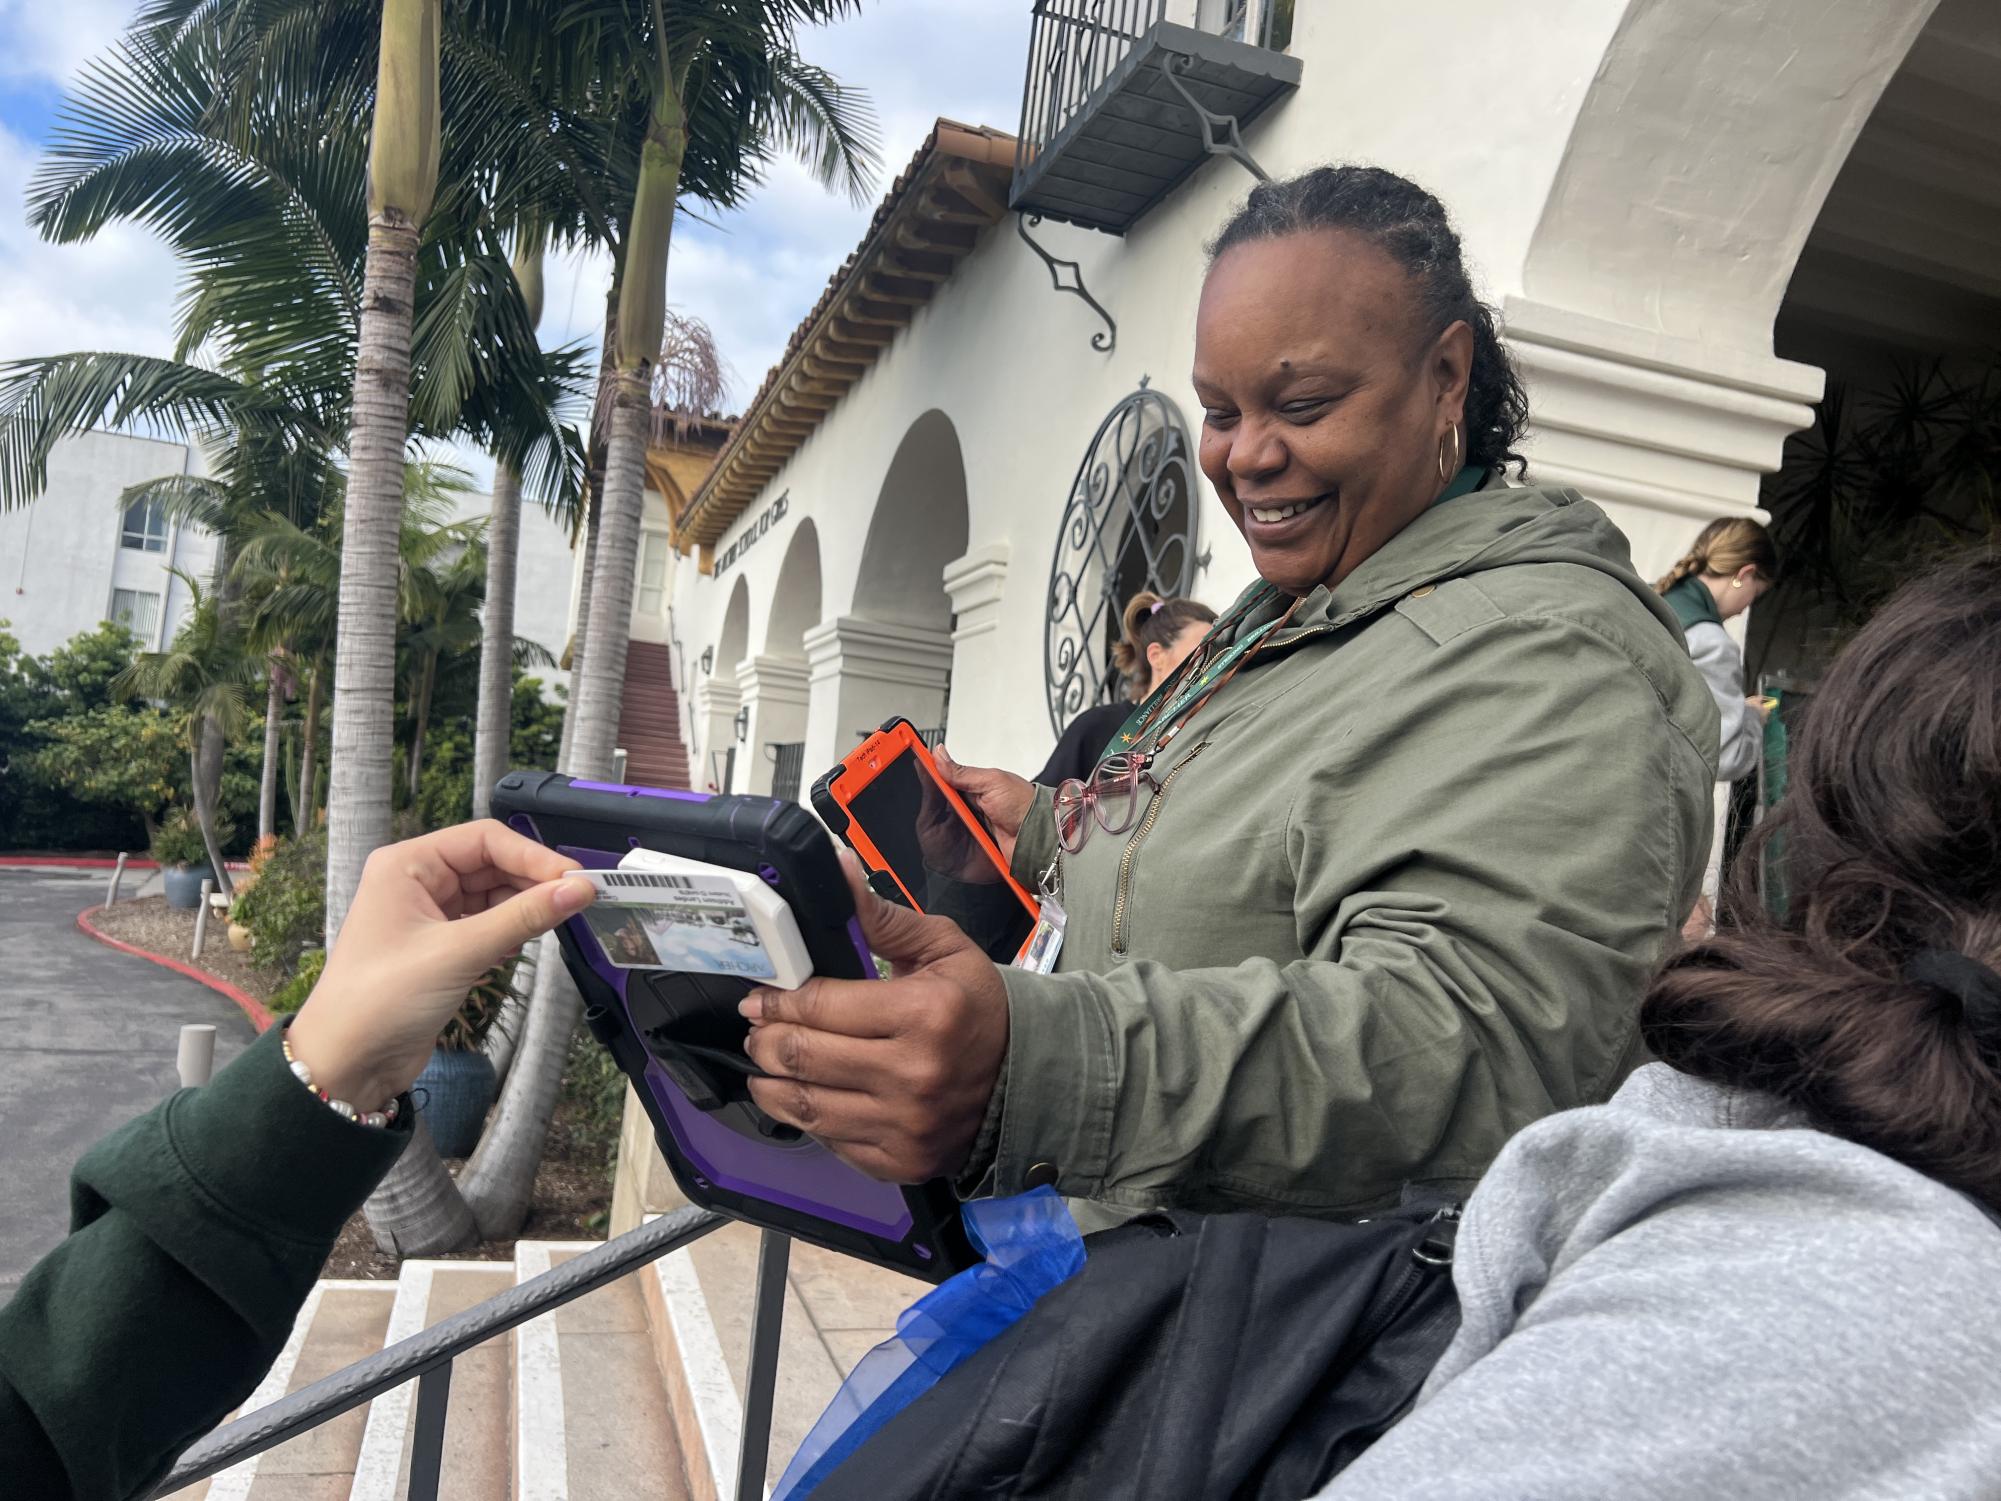 Director of Security and Transportation Yoshi Wilson scans students One Cards to mark attendance in the morning. She said she has enjoyed the all-girls school environment and has witnessed empowered women collaborating on projects and activism.